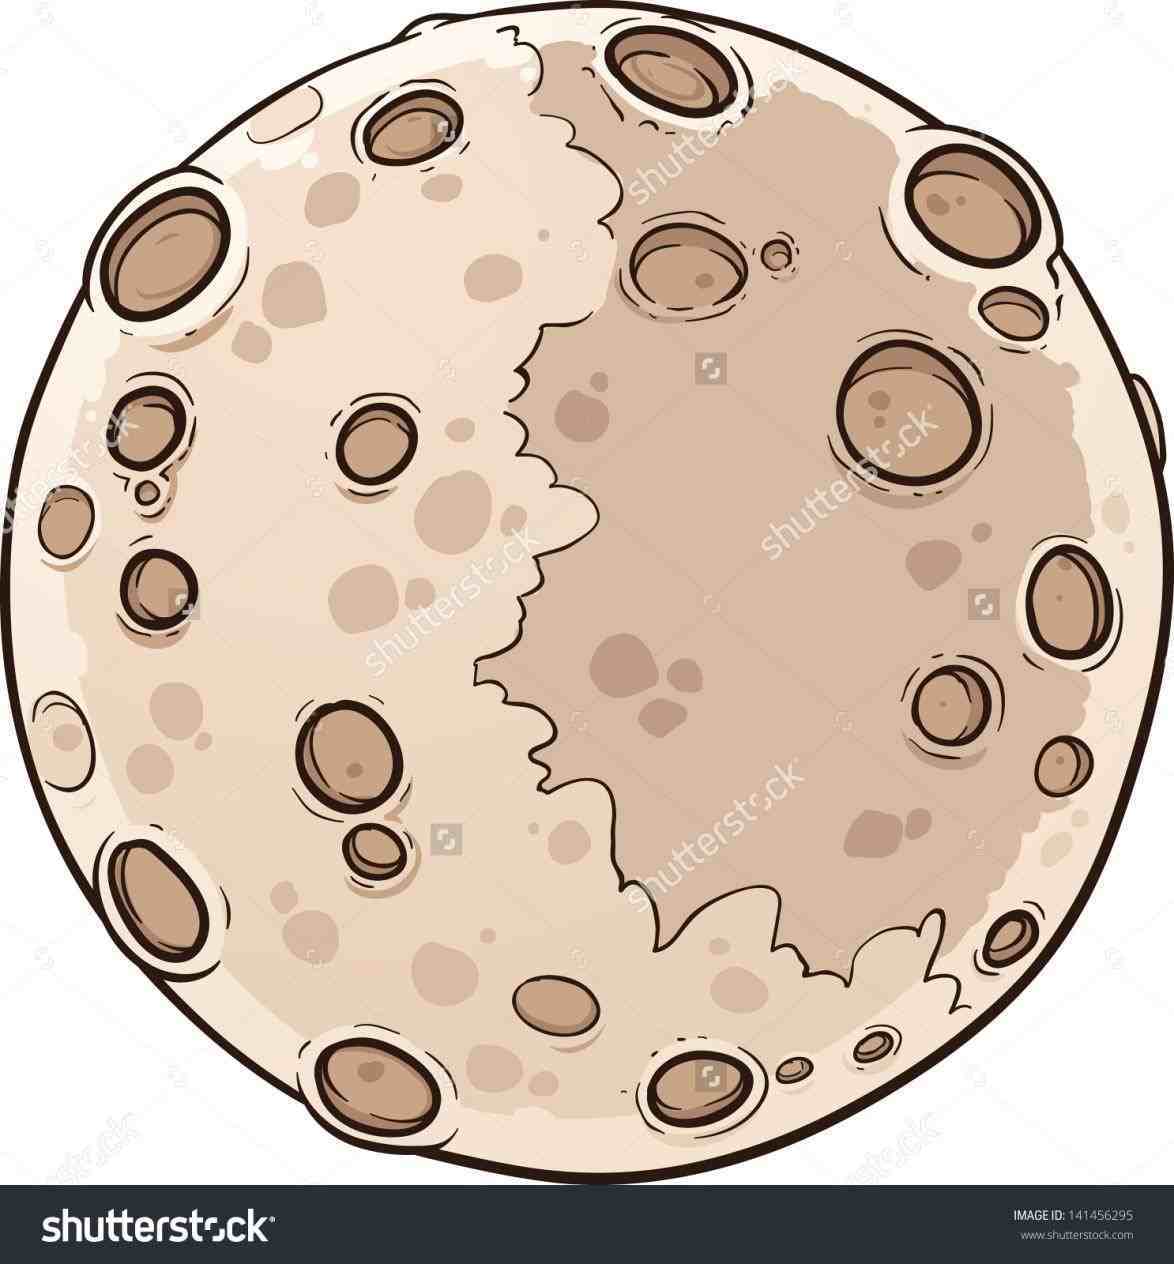 Asteroid clipart moon crater. Pencil and in color